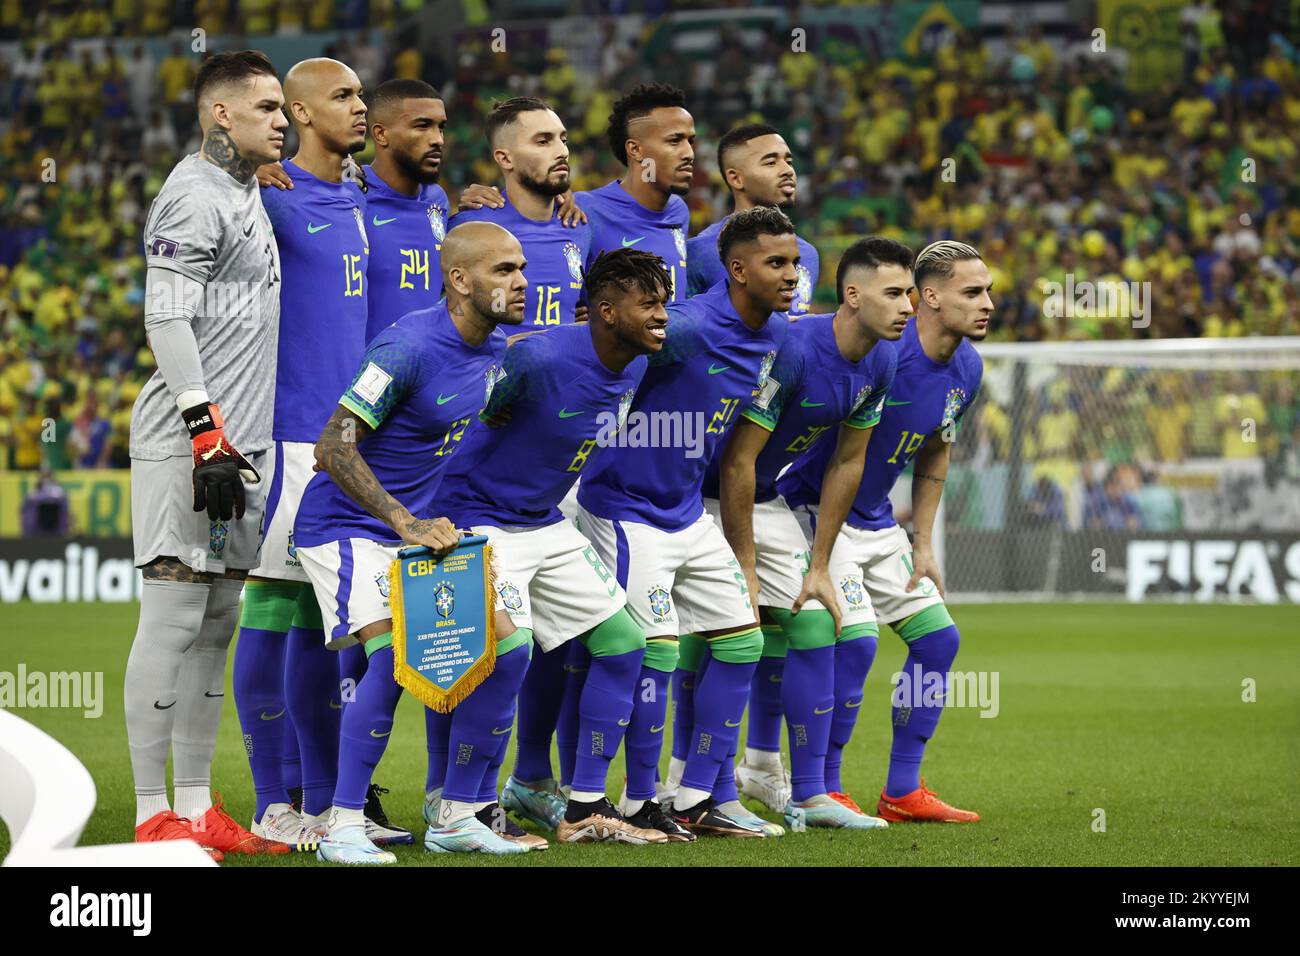 Qatar. 02nd Dec, 2022. LUSAIL CITY - Back row (lr) Brazil goalkeeper Emerson, Fabinho of Brazil, Gleison Bremer of Brazil, Alex Telles of Brazil, Eder Militao of Brazil, Gabriel Jesus of Brazil. Front row (l-r) Dani Alves of Brazil, Fred of Brazil, Rodrigo of Brazil, Vinicius Junior of Brazil, Antony of Brazil during the FIFA World Cup Qatar 2022 group G match between Cameroon and Brazil at Lusail Stadium on December 2, 2022 in Lusail City, Qatar. AP | Dutch Height | MAURICE OF STONE Credit: ANP/Alamy Live News Stock Photo